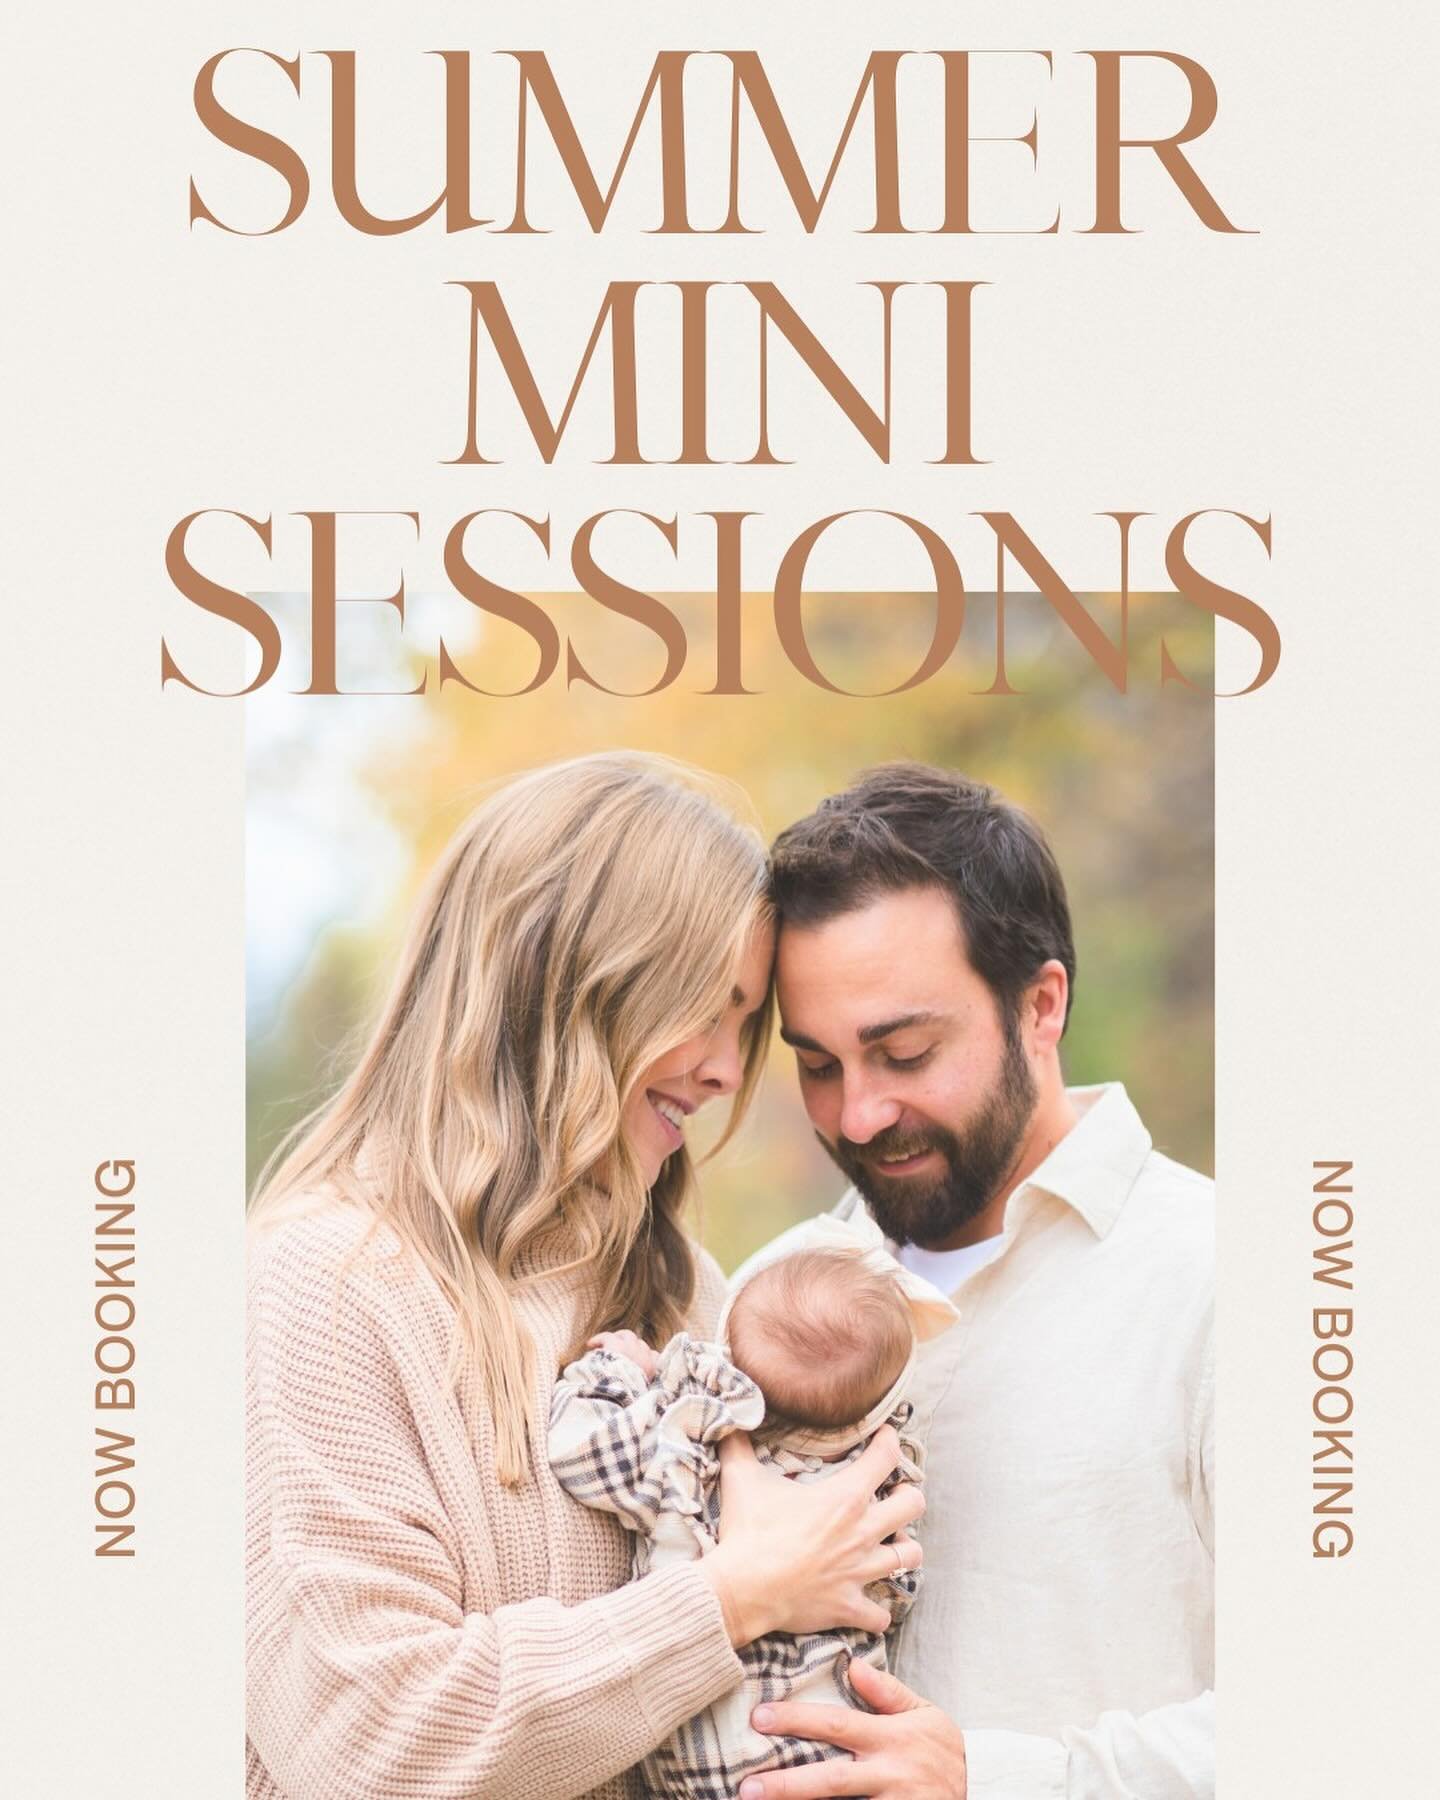 Summer sessions perfect for families, couples or besties! Here are the details: 

✨ 15 minute session
✨ Minimum of 20 edited images 
✨ Photos delivered in 5 days
✨ $175 + tax 

DM me to book your spot!